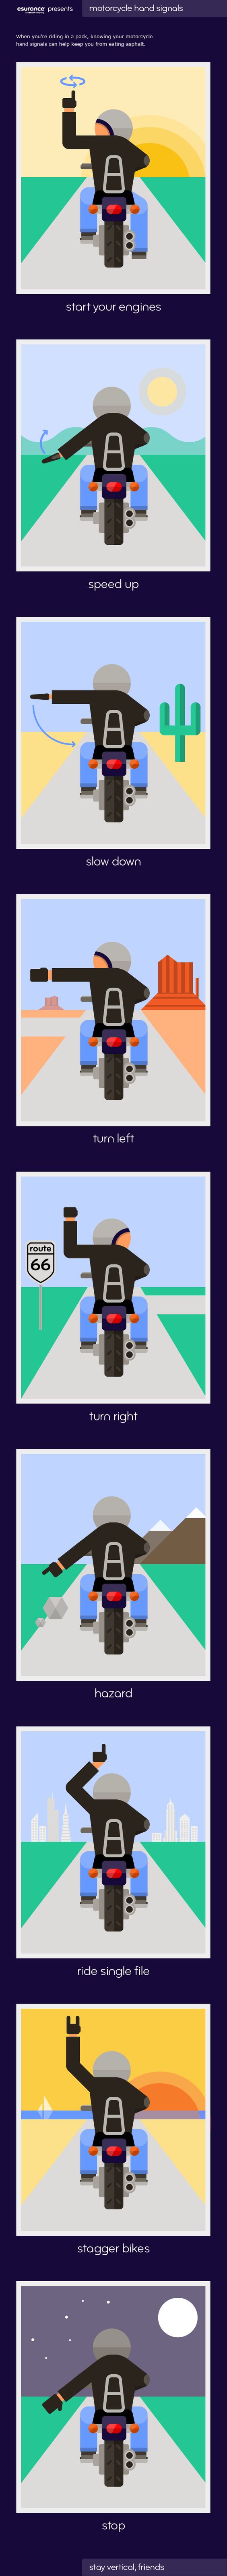 Motorcycle riders use a variety of signals to indicate everything from “slow down” to “watch out, hazard ahead.” Check out the infograph to see the top 9 motorcycle hand signals.